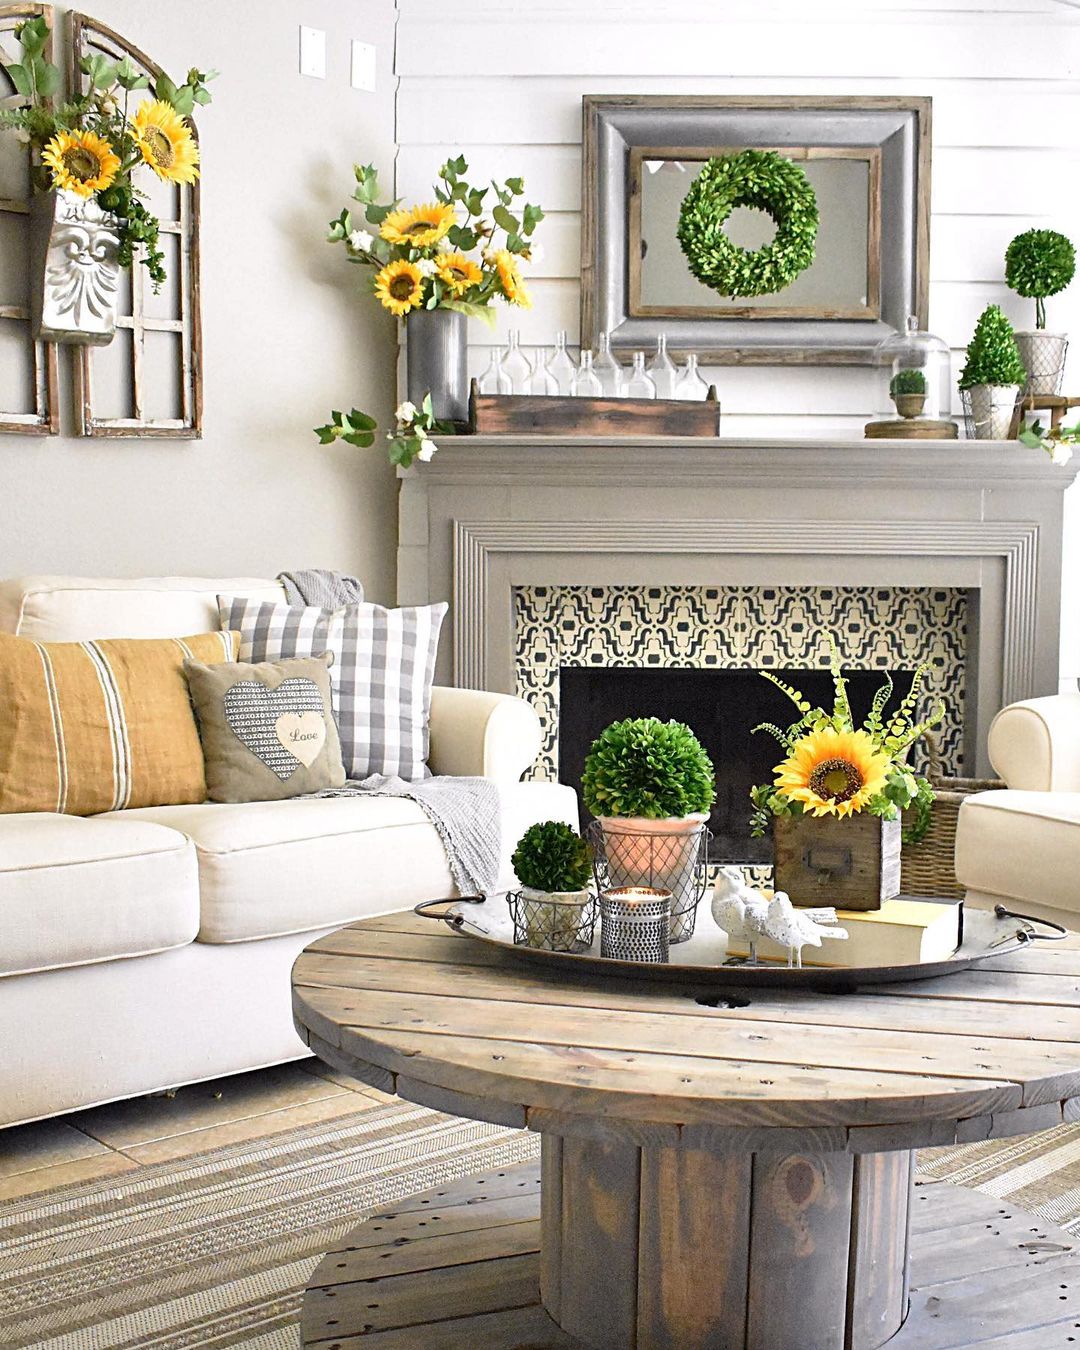 Rustic Sunflower and Greenery for a Cozy Summer Mantel